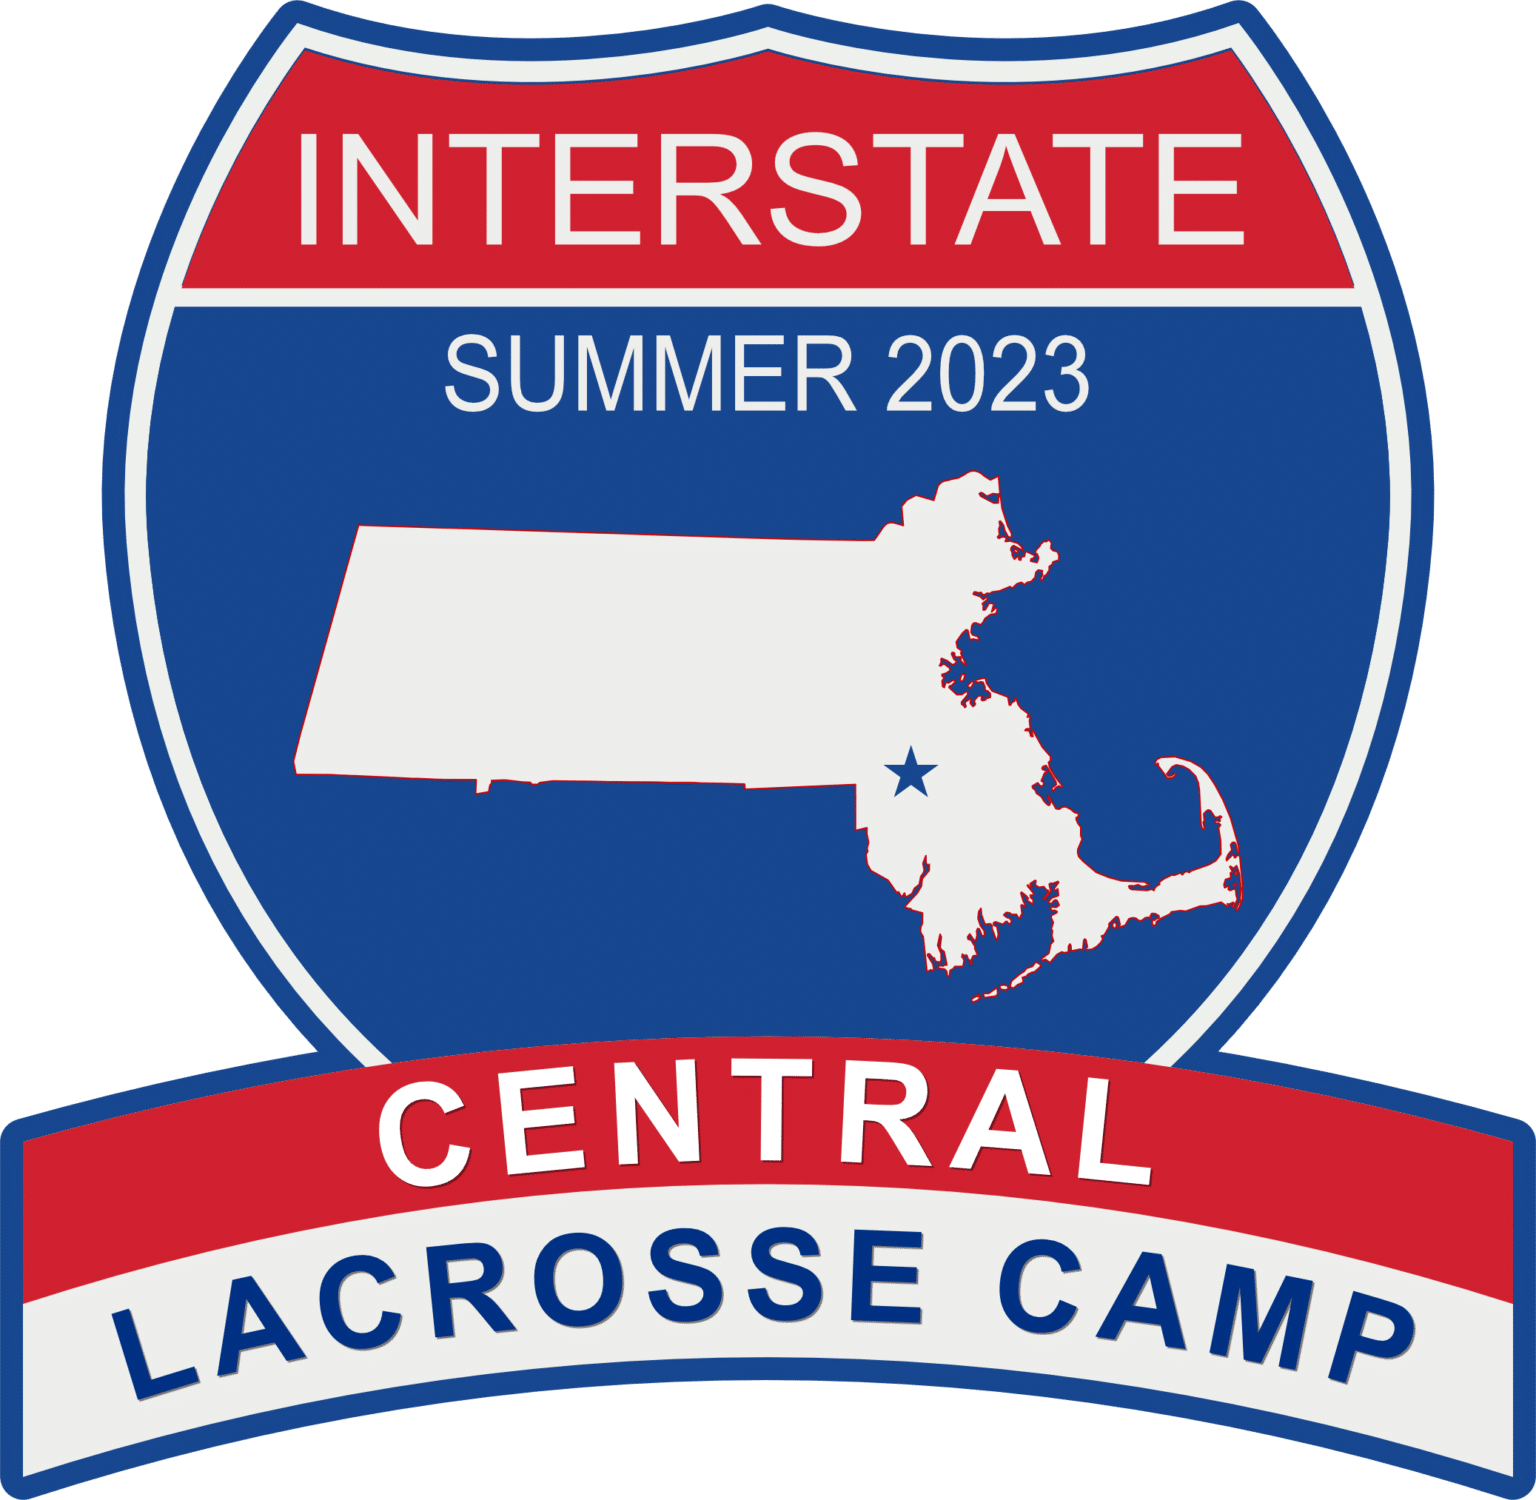 Lacrosse summer camps guide 2023 New England Lacrosse Journal